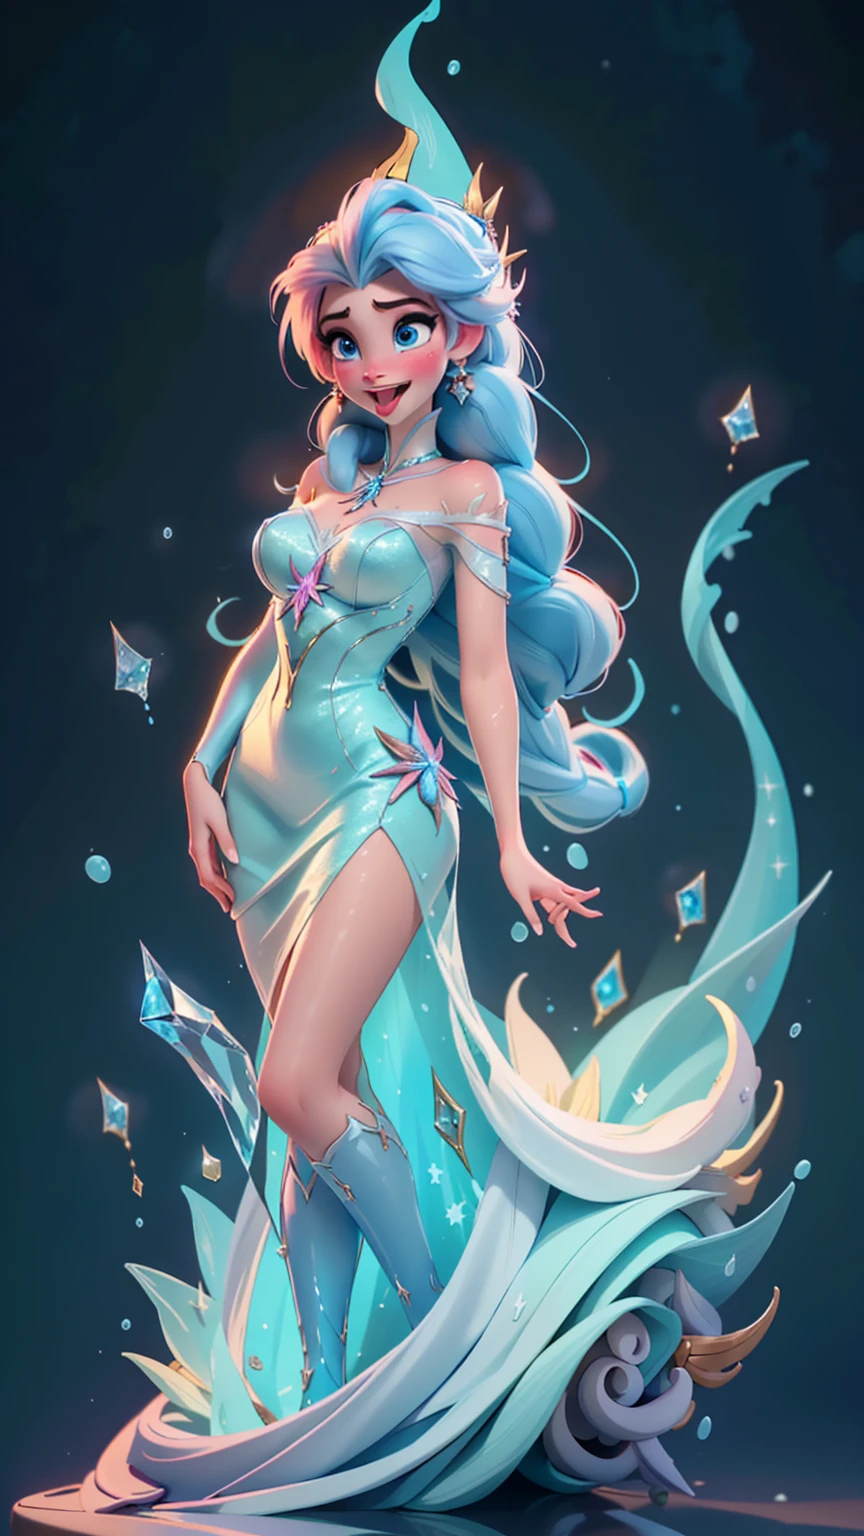 Elsa-Ariel Fusion, Merging models, melting, Ariel&#39;s clothes, 1girl, Beautiful, character, Woman, female, beachfront, (master part:1.2), (best qualityer:1.2), (standing alone:1.2), ((struggling pose)), ((field of battle)), cinemactic, perfects eyes, perfect  skin, perfect lighting, sorrido, Lumiere, Farbe, texturized skin, detail, Beauthfull, wonder wonder wonder wonder wonder wonder wonder wonder wonder wonder wonder wonder wonder wonder wonder wonder wonder wonder wonder wonder wonder wonder wonder wonder wonder wonder wonder wonder wonder wonder wonder wonder, ultra detali, face perfect, arousal, eyes roll, ((tongue out)), ((saliva dripping)), ahegao, A peace sign with hands